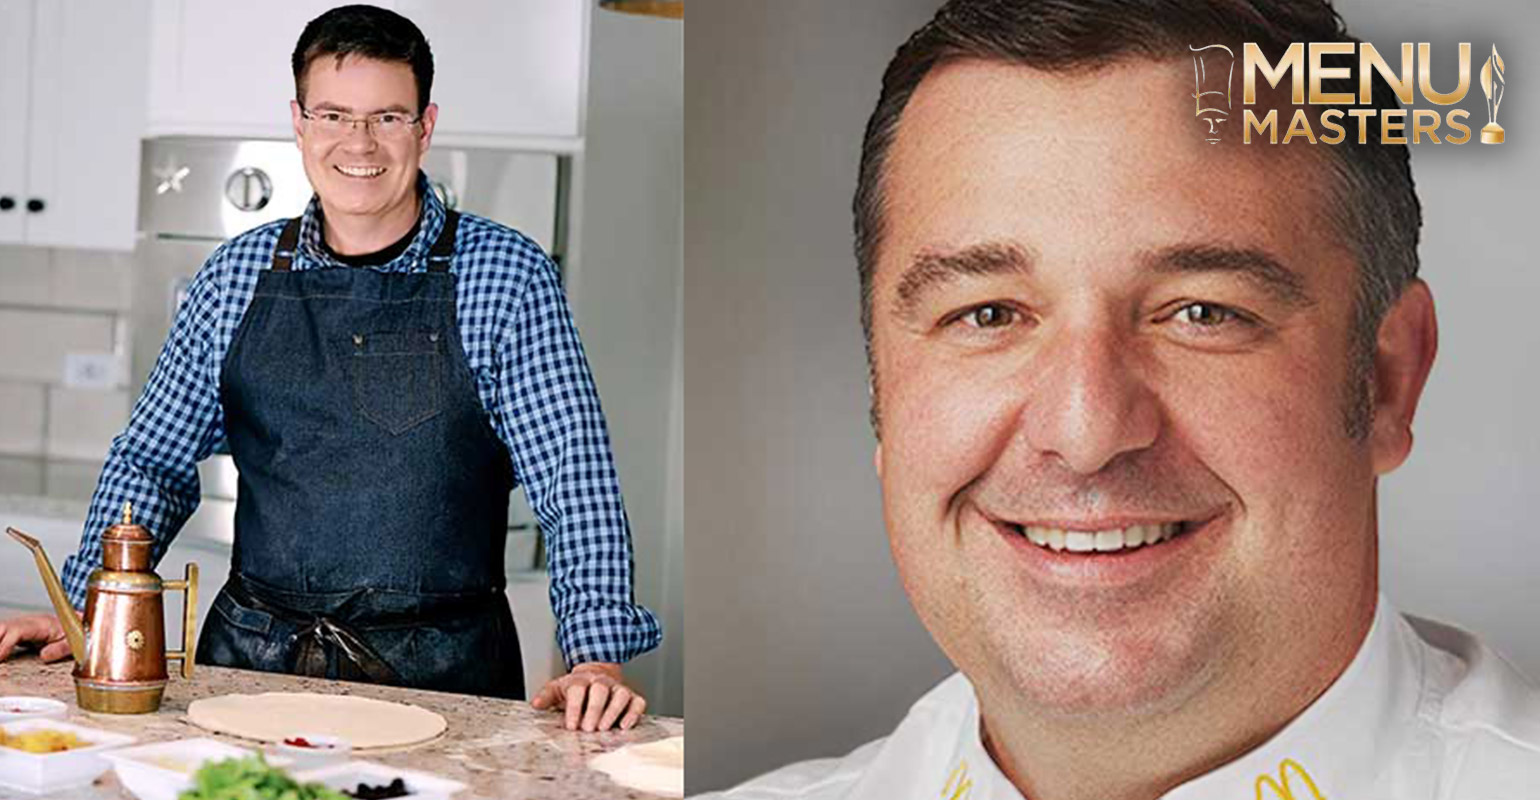 Chefs Dan Coudreaut and Chad Schafer Lean Into Radical Transparency for Culinary Leadership